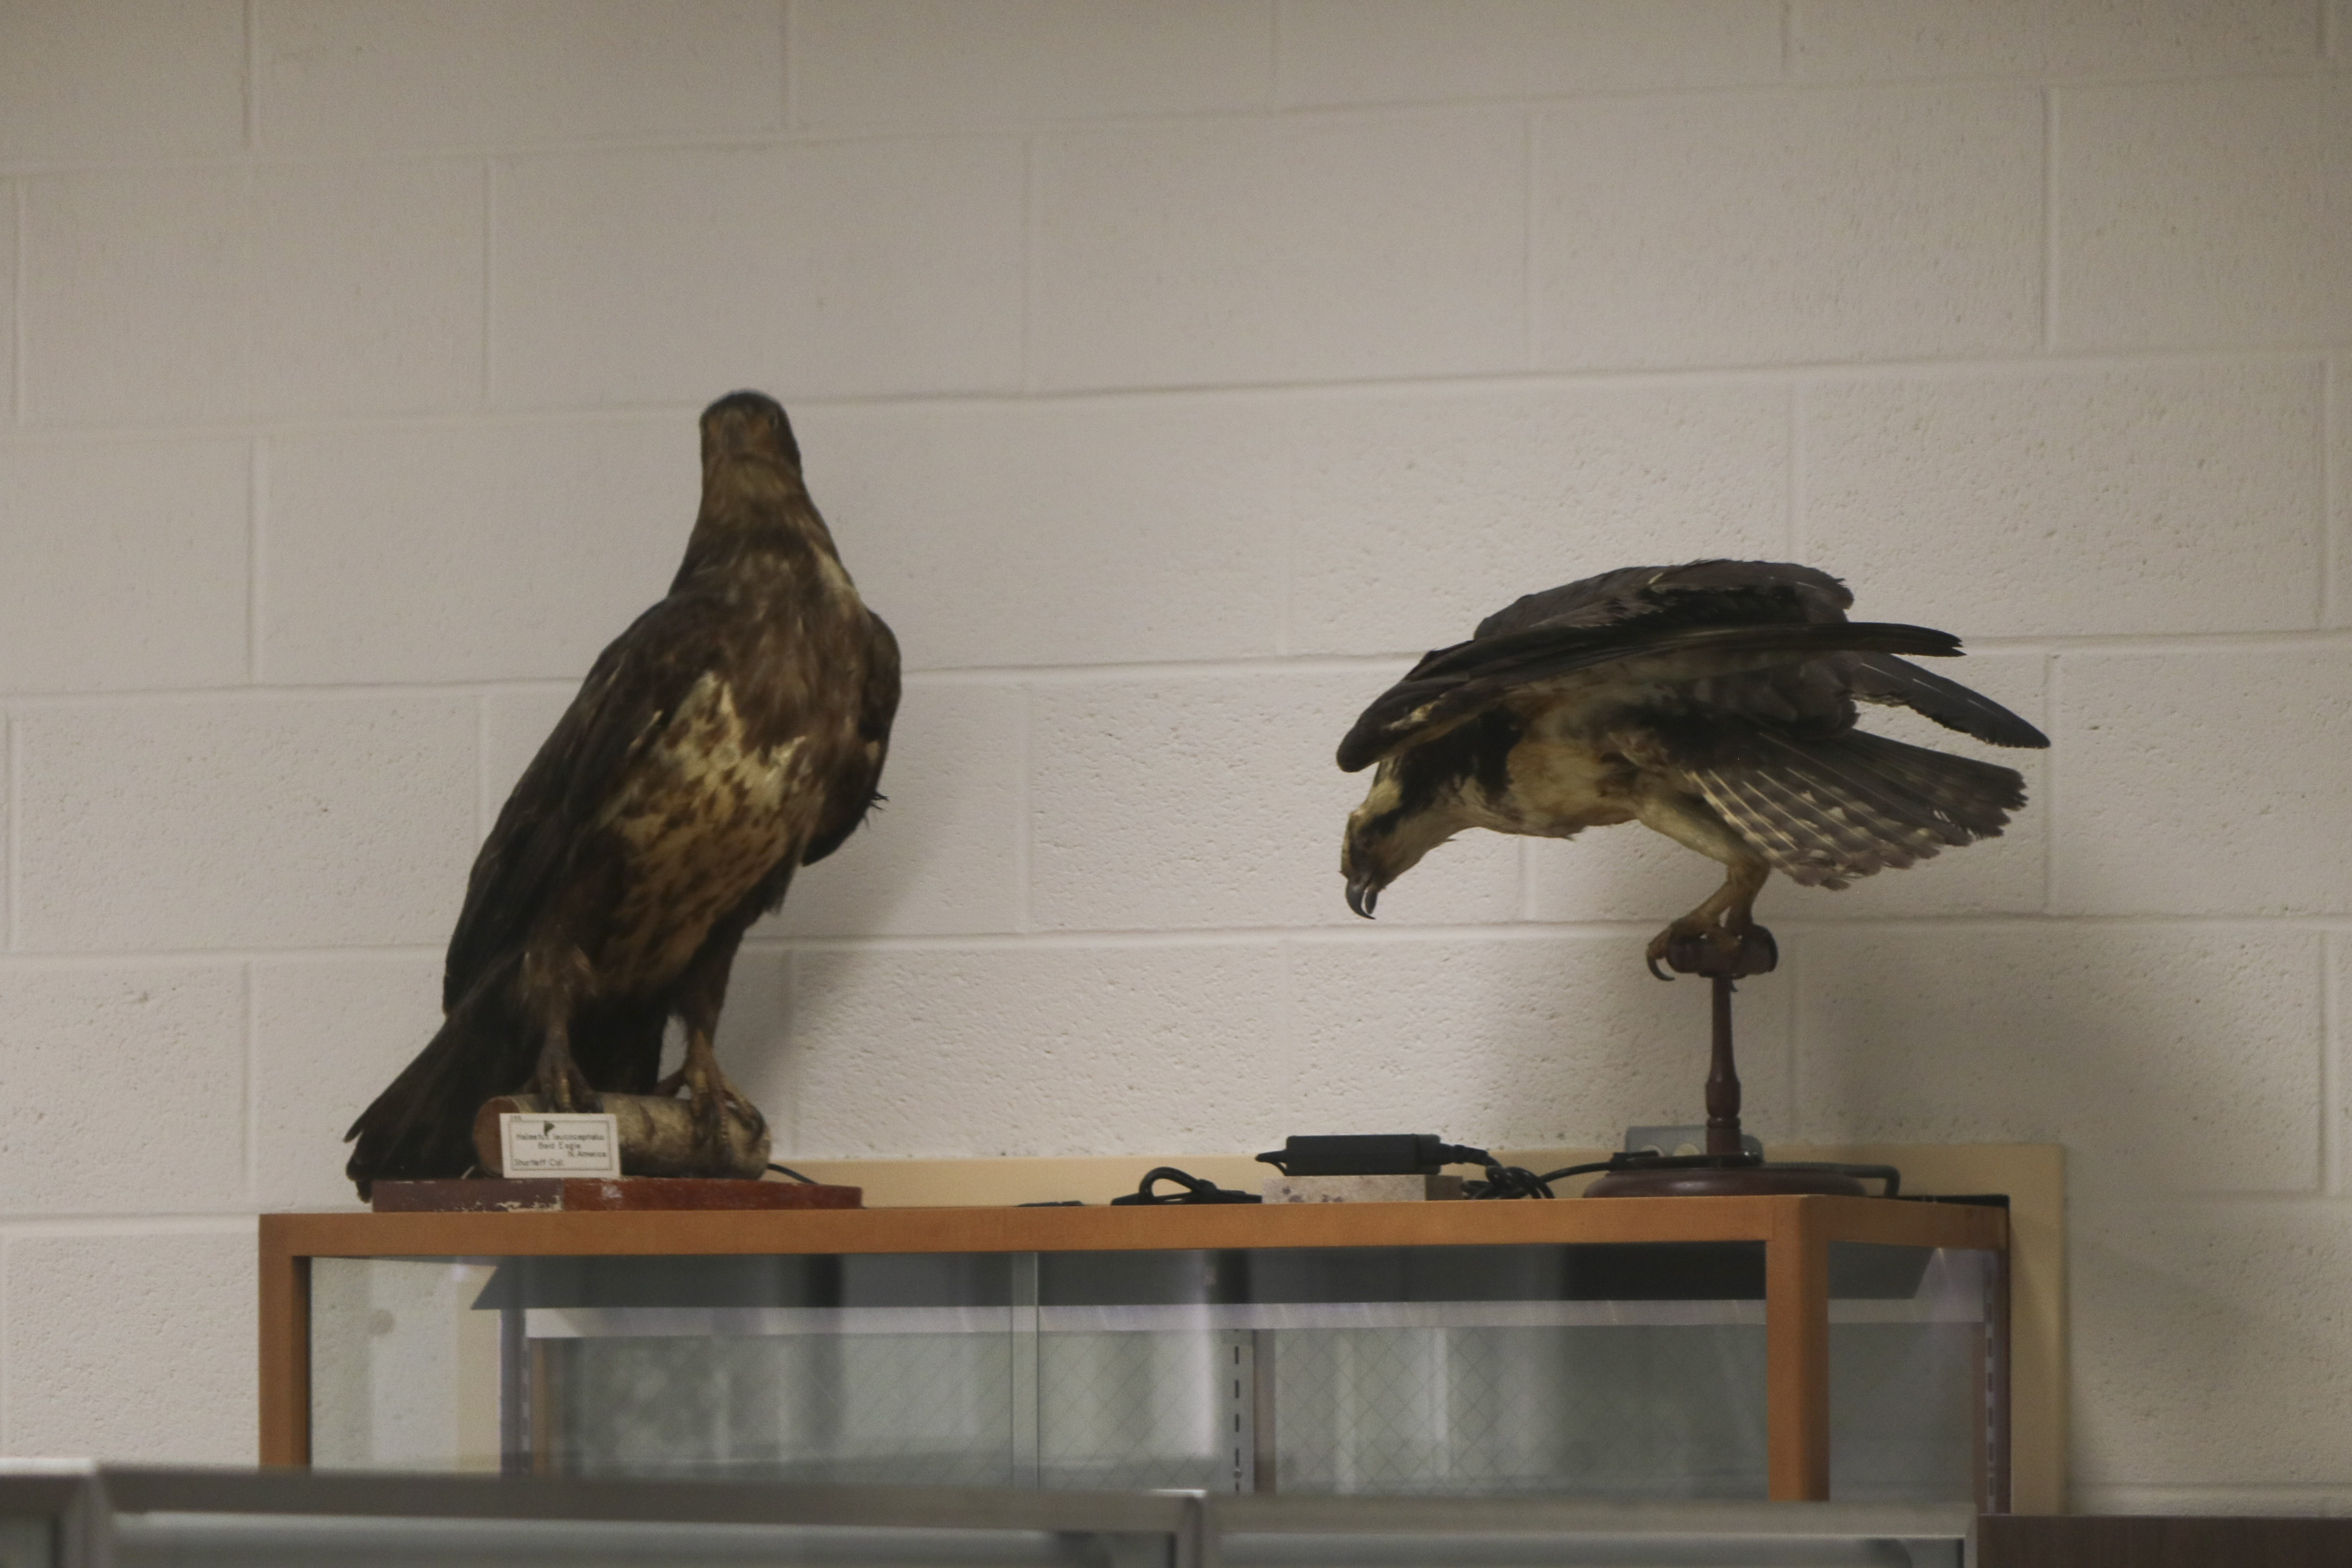 Two restored birds reside in the Joe Webb Peoples Museum. The birds are posed according to photos in The Birds of America by John James Audubon and were restored by a preparator in the Yale Peabody Museum. Ava Nederlander, Staff Photographer.